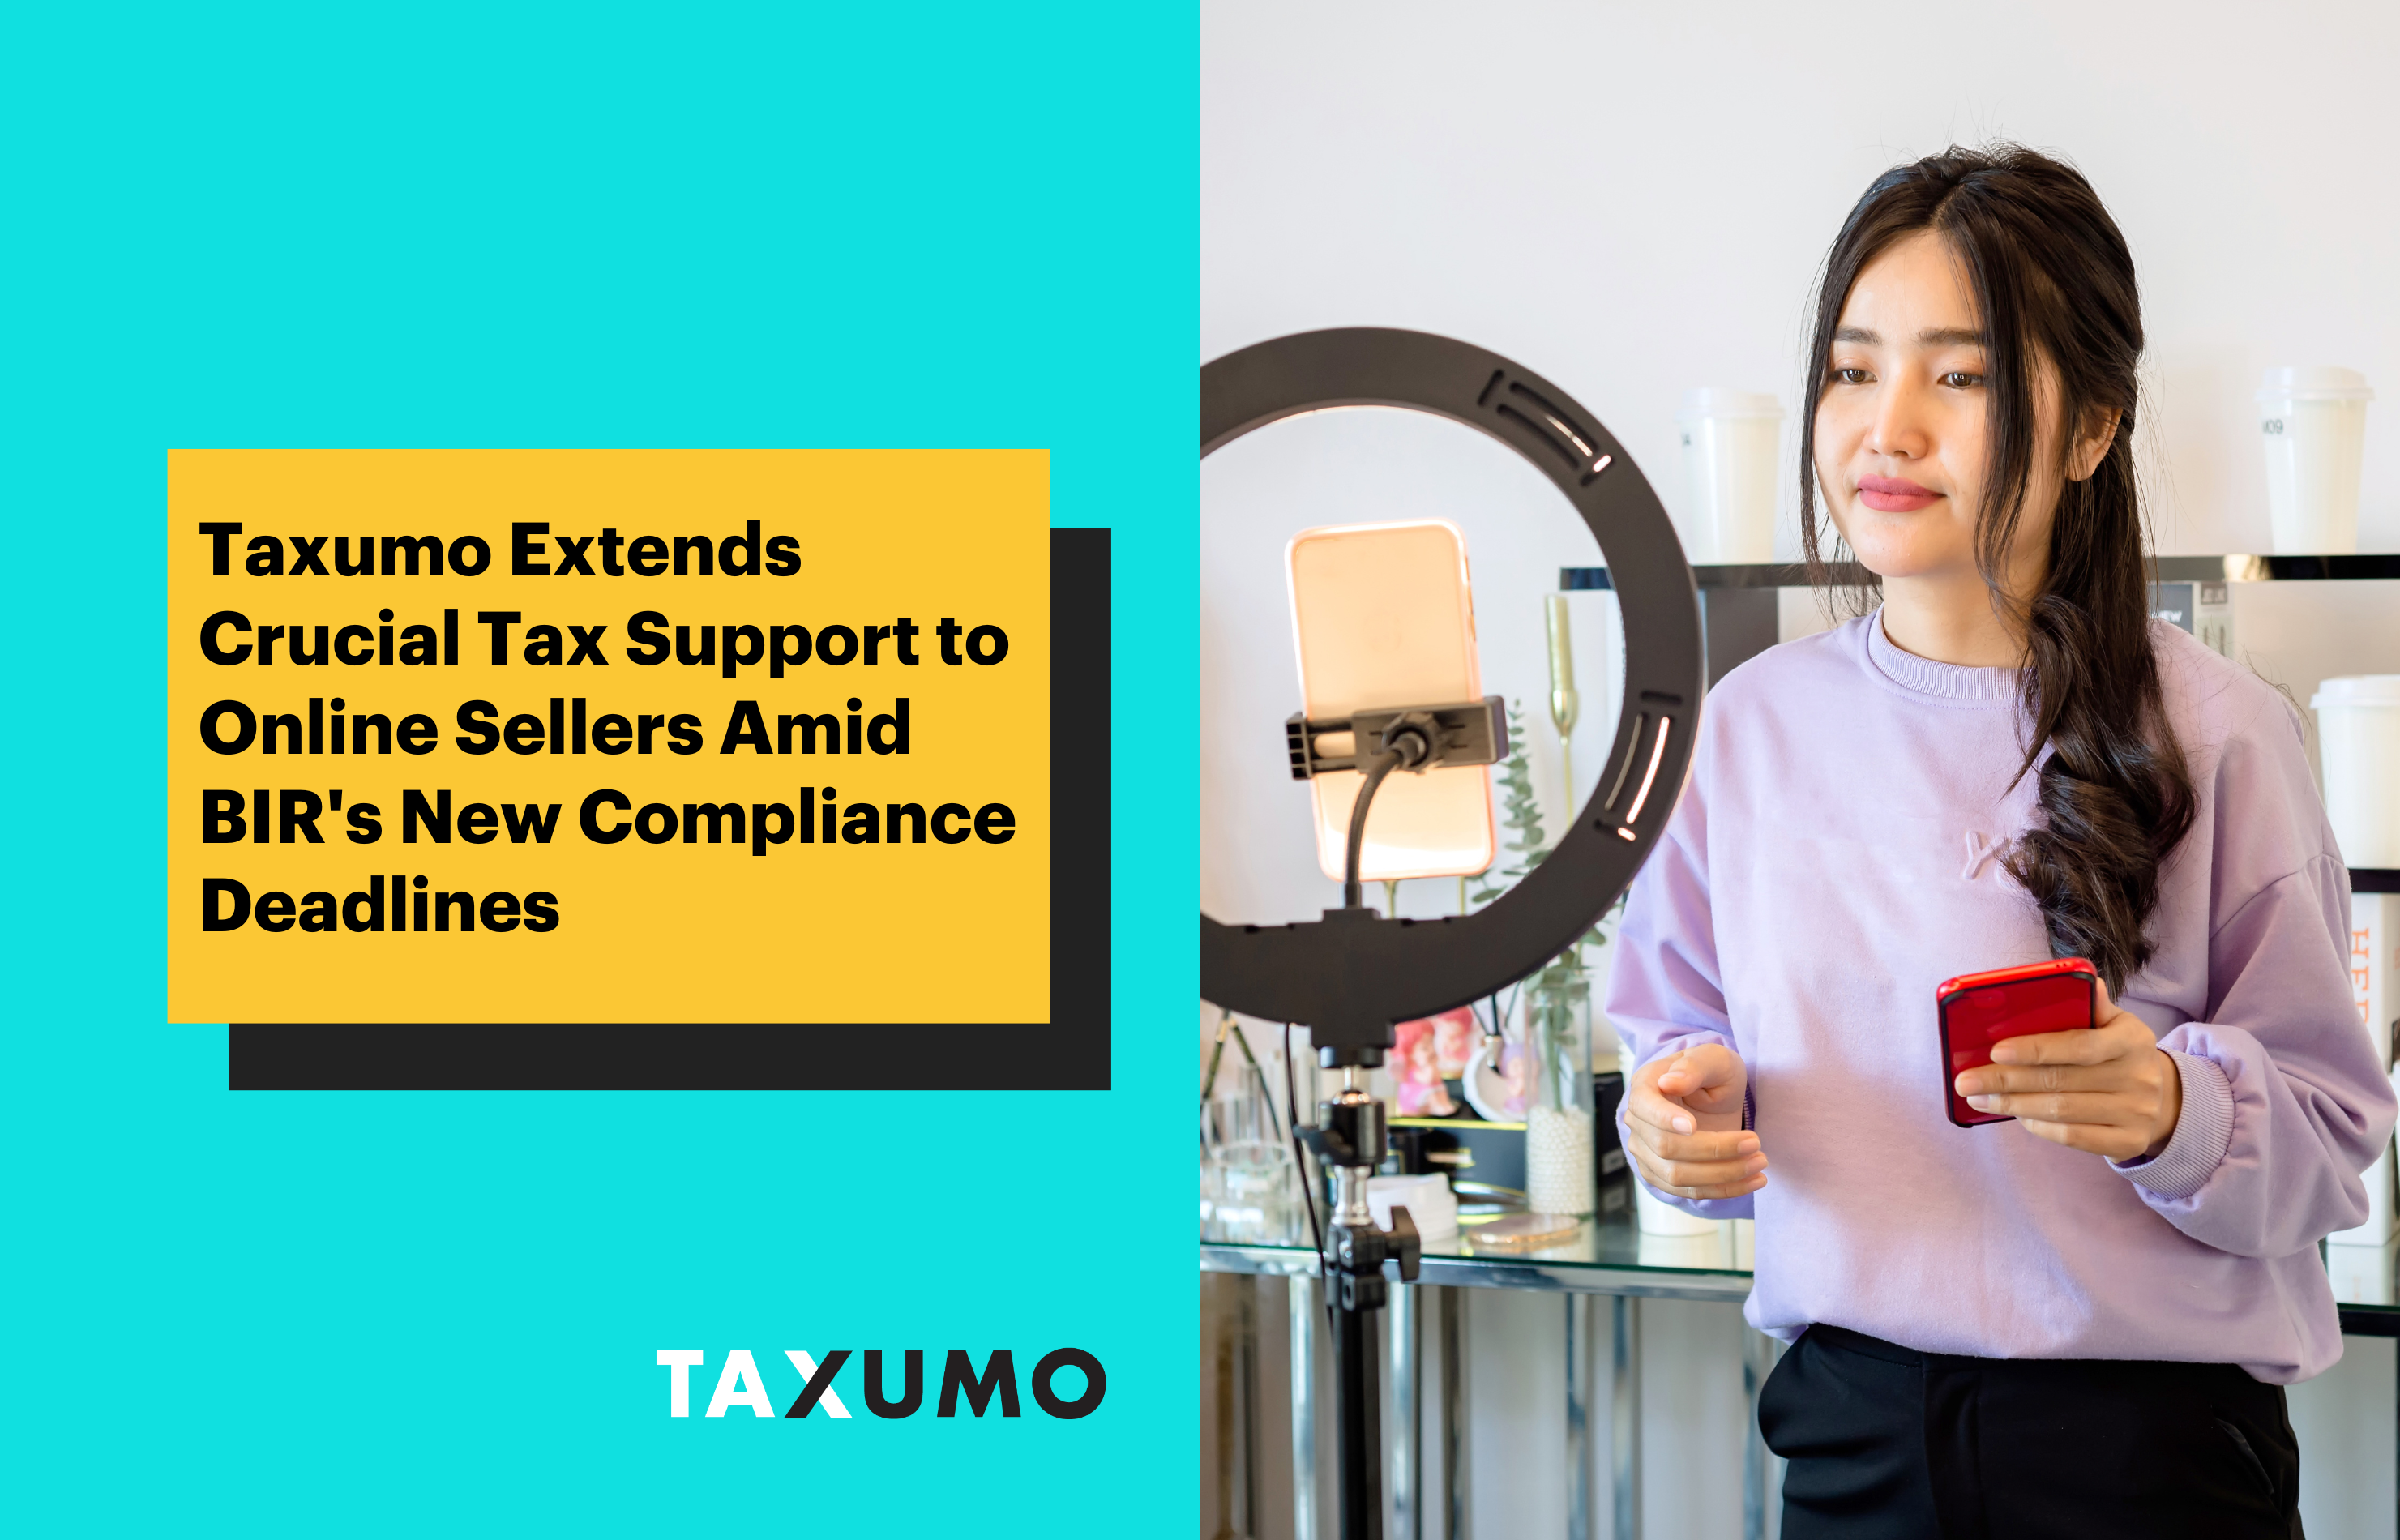 Taxumo Extends Crucial Tax Support to Online Sellers Amid BIR's New Compliance Deadlines